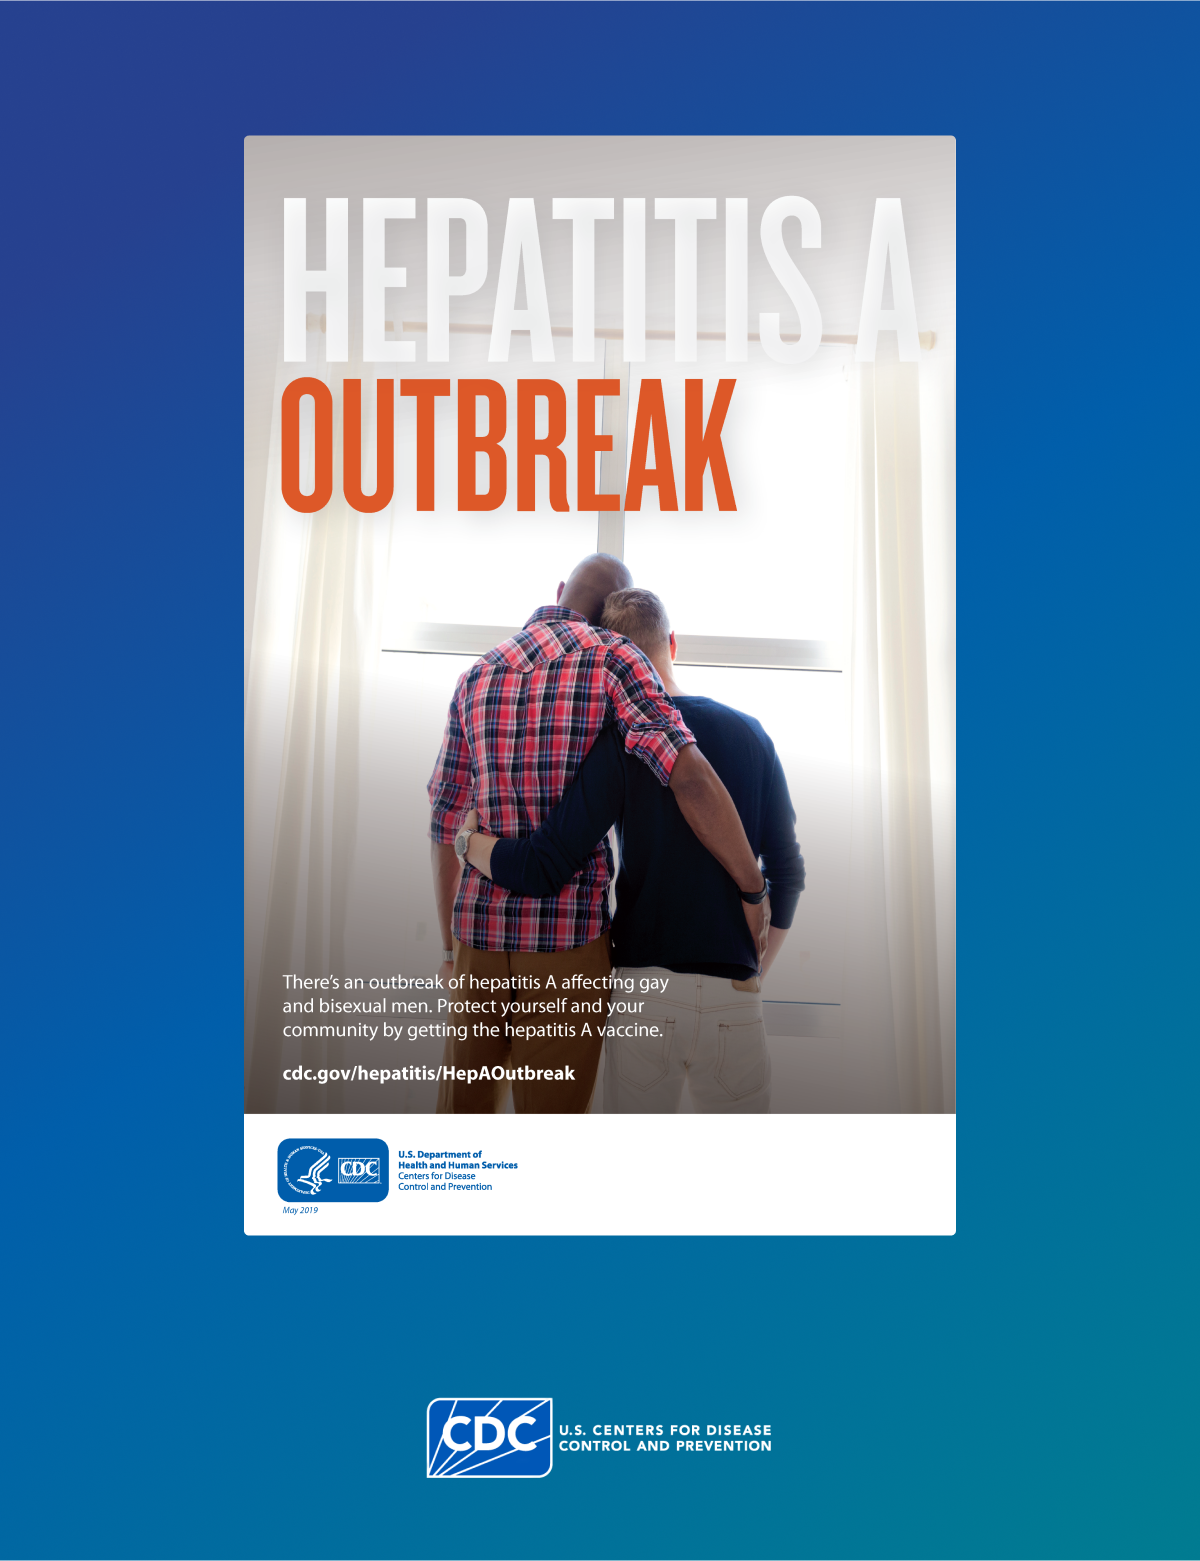 Poster showing details around a hepatitis A outbreak affecting gay and bisexual men